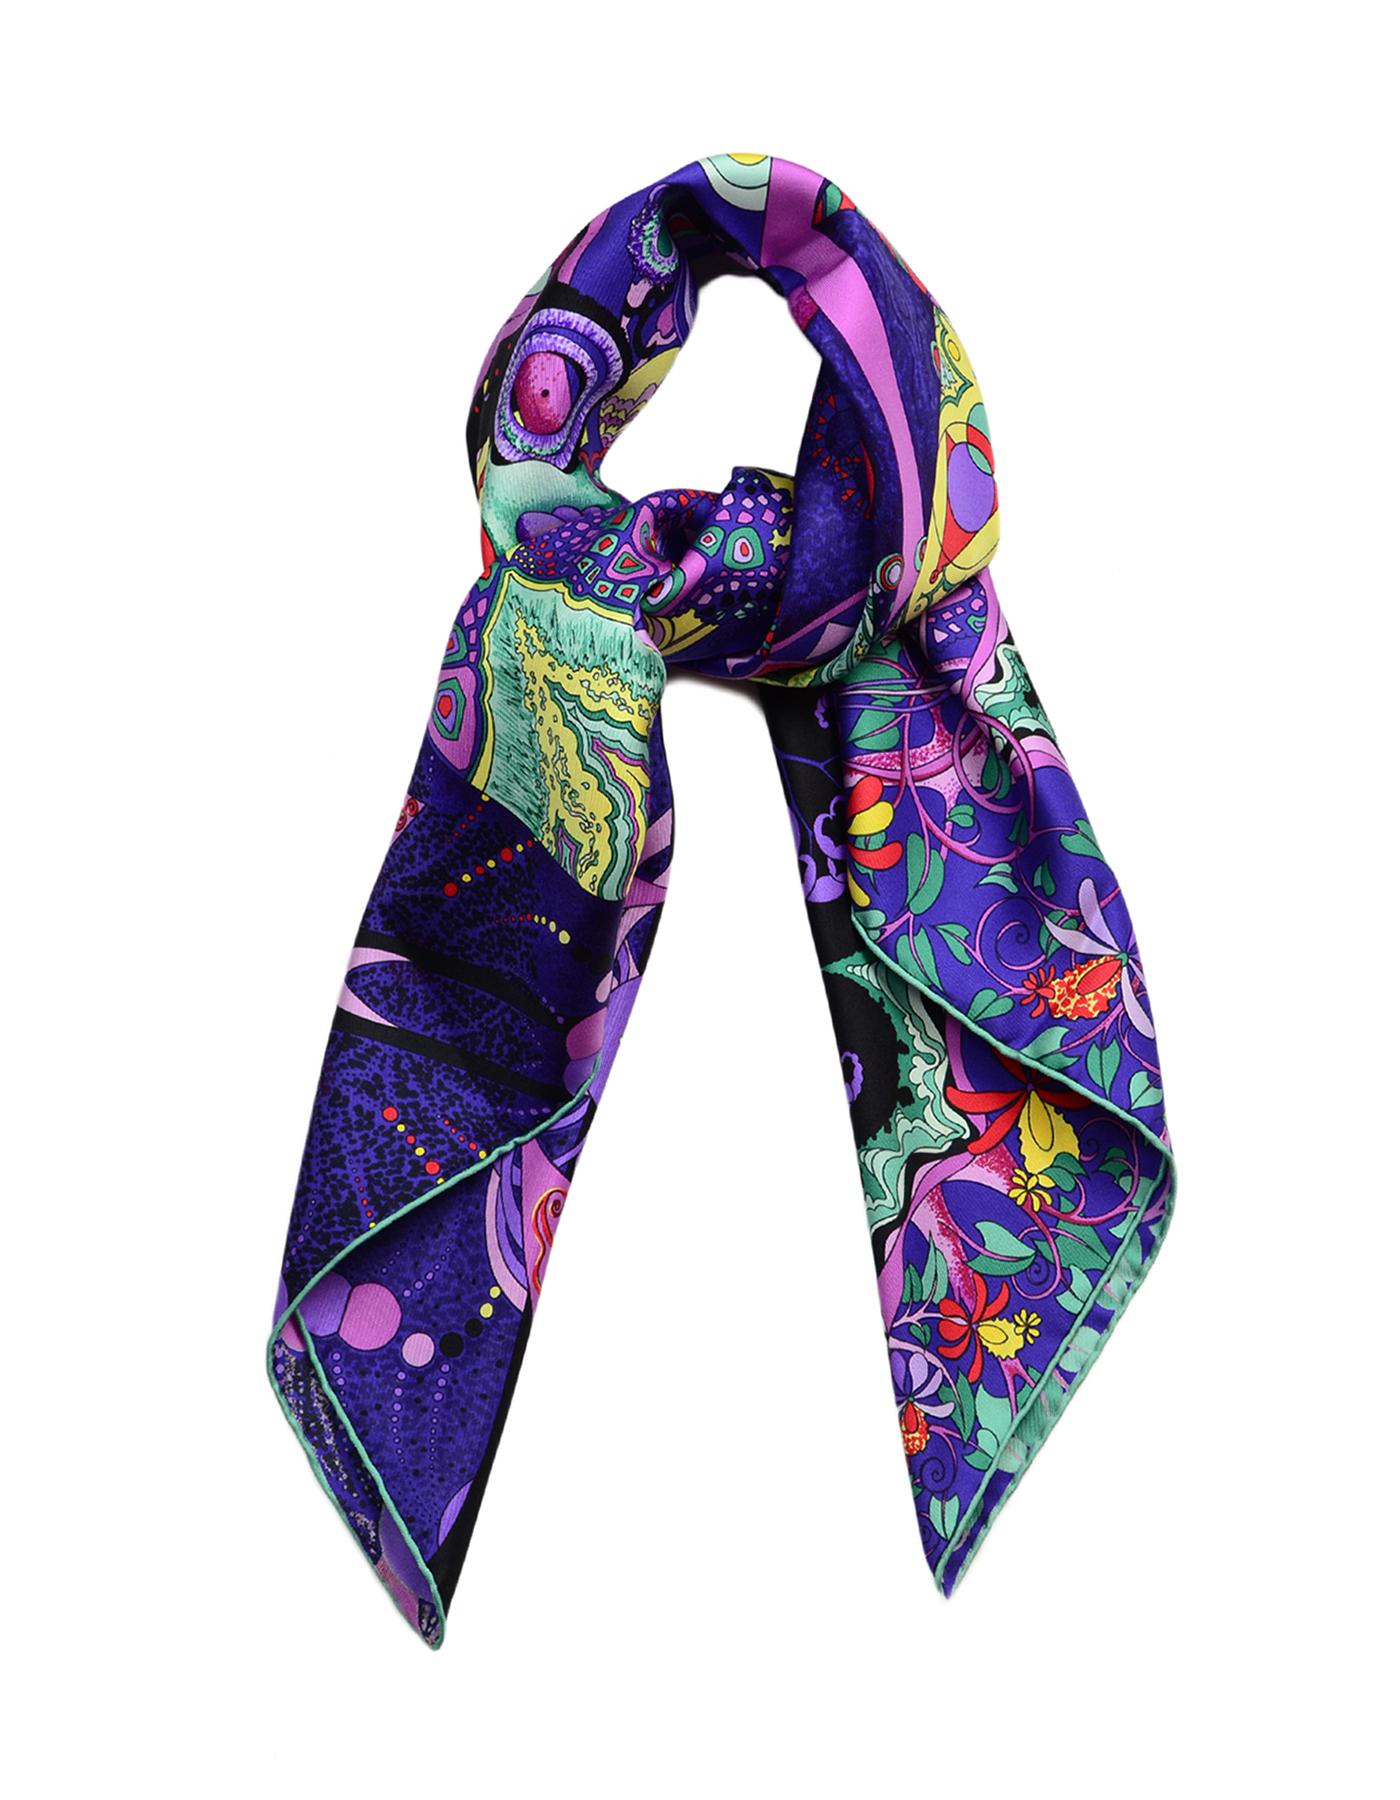 Hermes Purple/Ultra Violet/Cyclamen/Vert L'ivresse De L'infini 90CM Silk Scarf W/ Box

Made In: France
Color: Purple, ultra violet, cyclamen, vert, multicolor
Materials: 100% silk
Overall Condition: Excellent pre-owned condition
Estimated Retail: